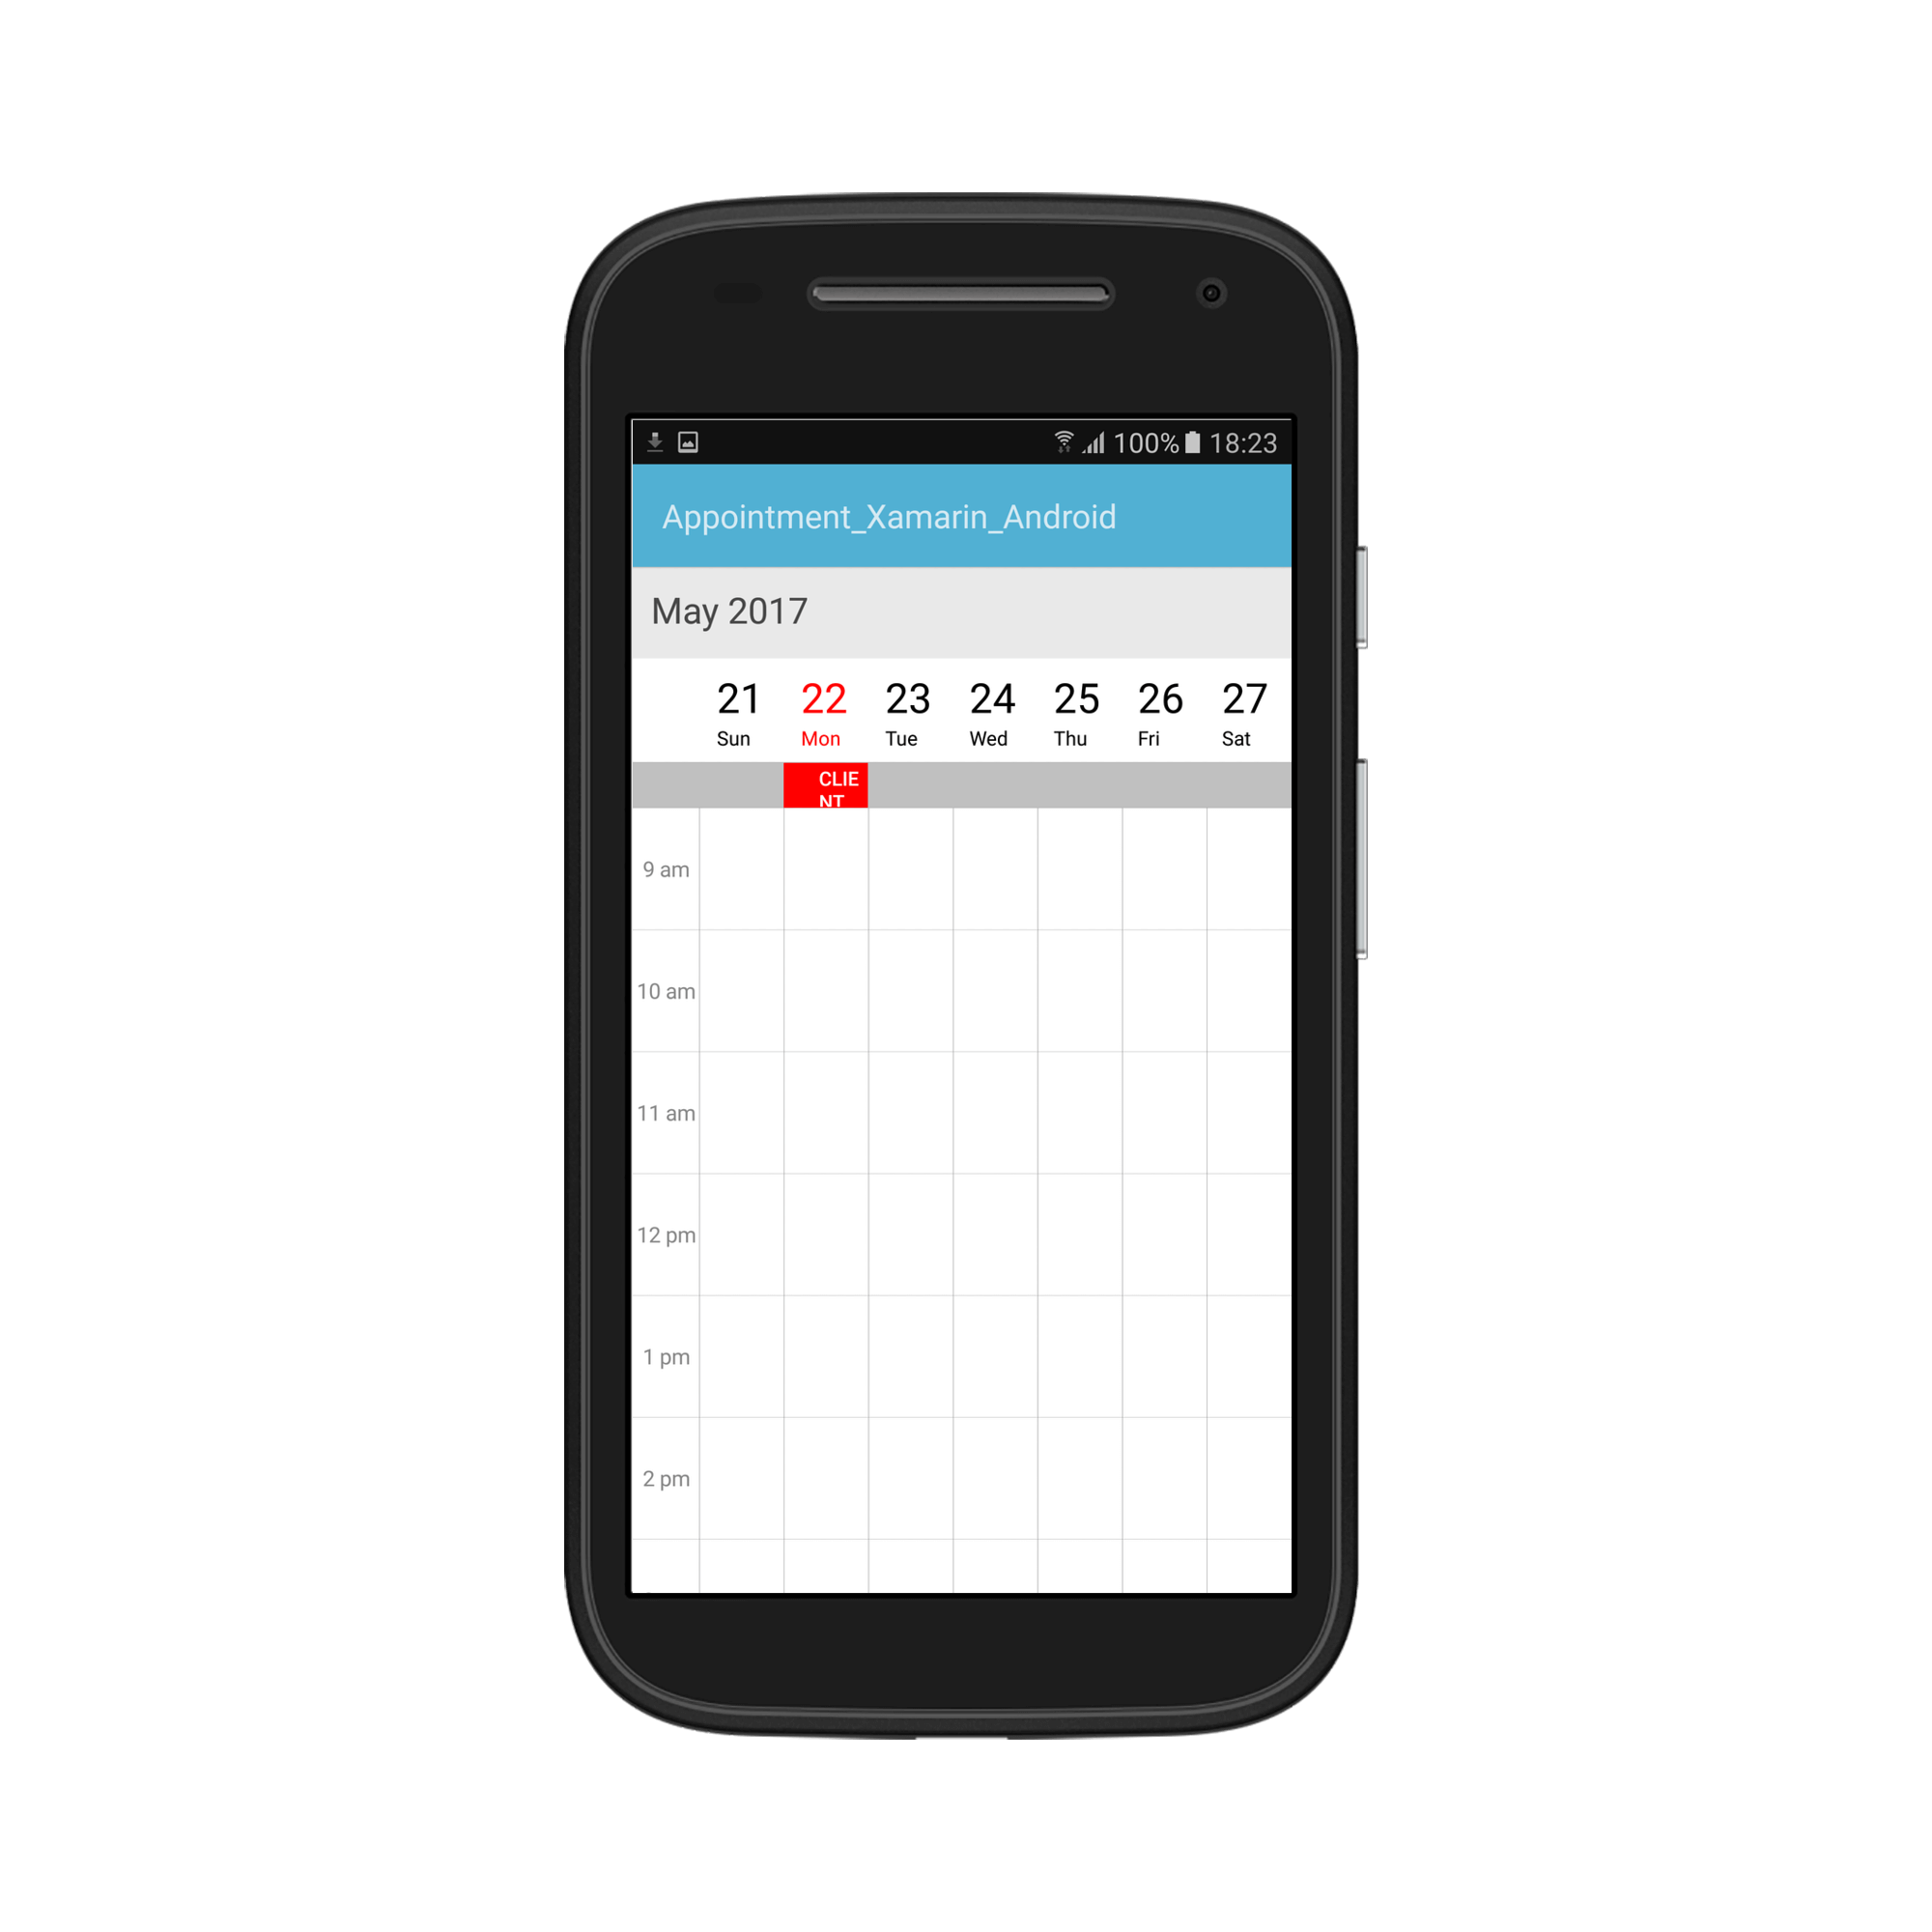 All day appointments in schedule Xamarin Android